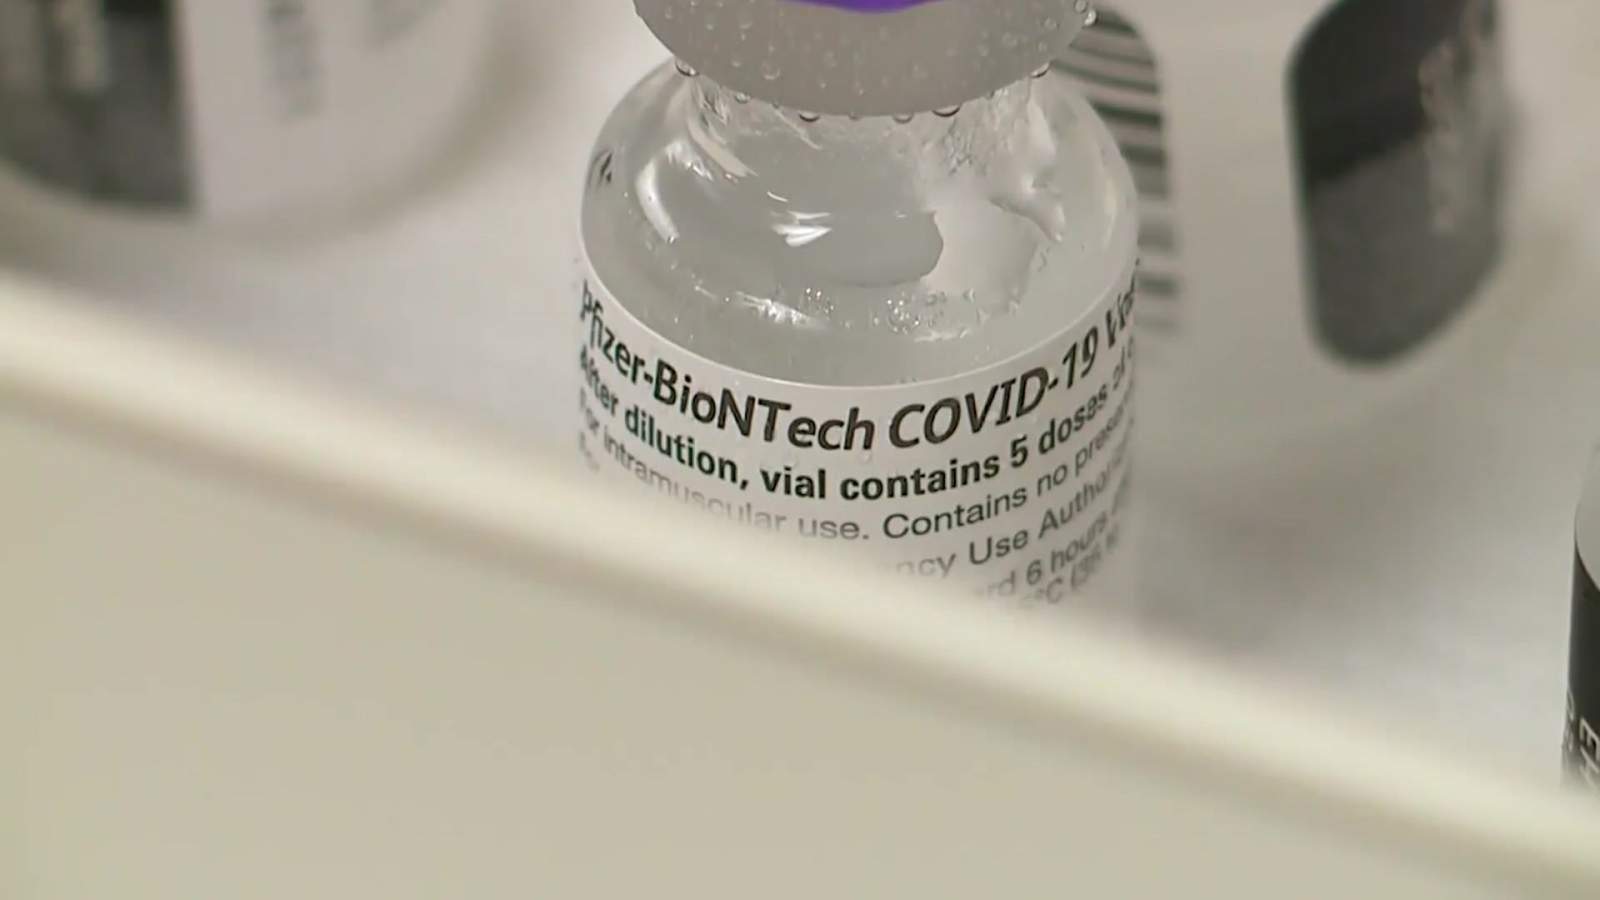 Some in Houston area eligible to get vaccinated frustrated with lack of access to coronavirus shot